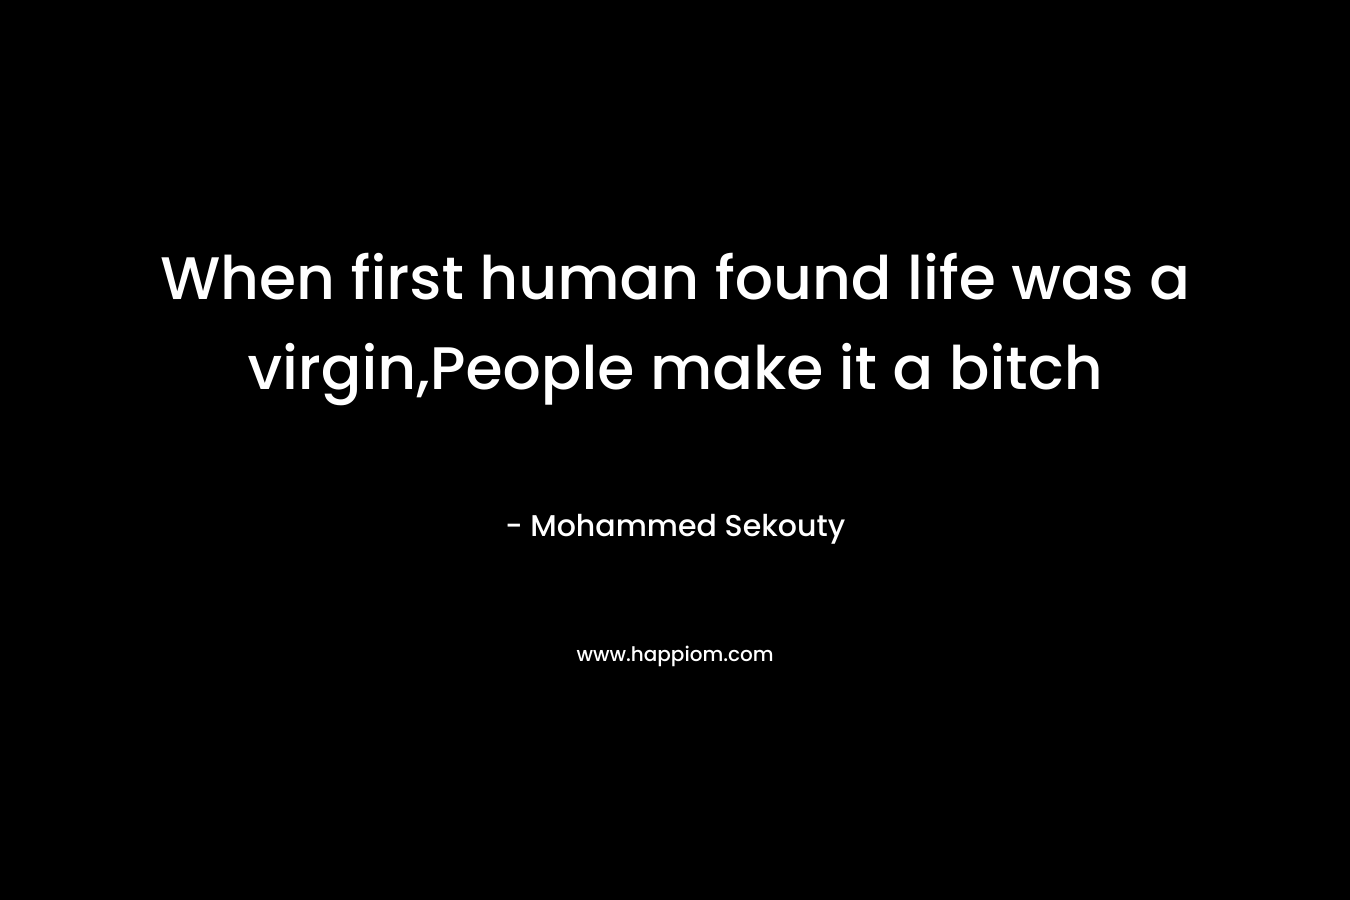 When first human found life was a virgin,People make it a bitch